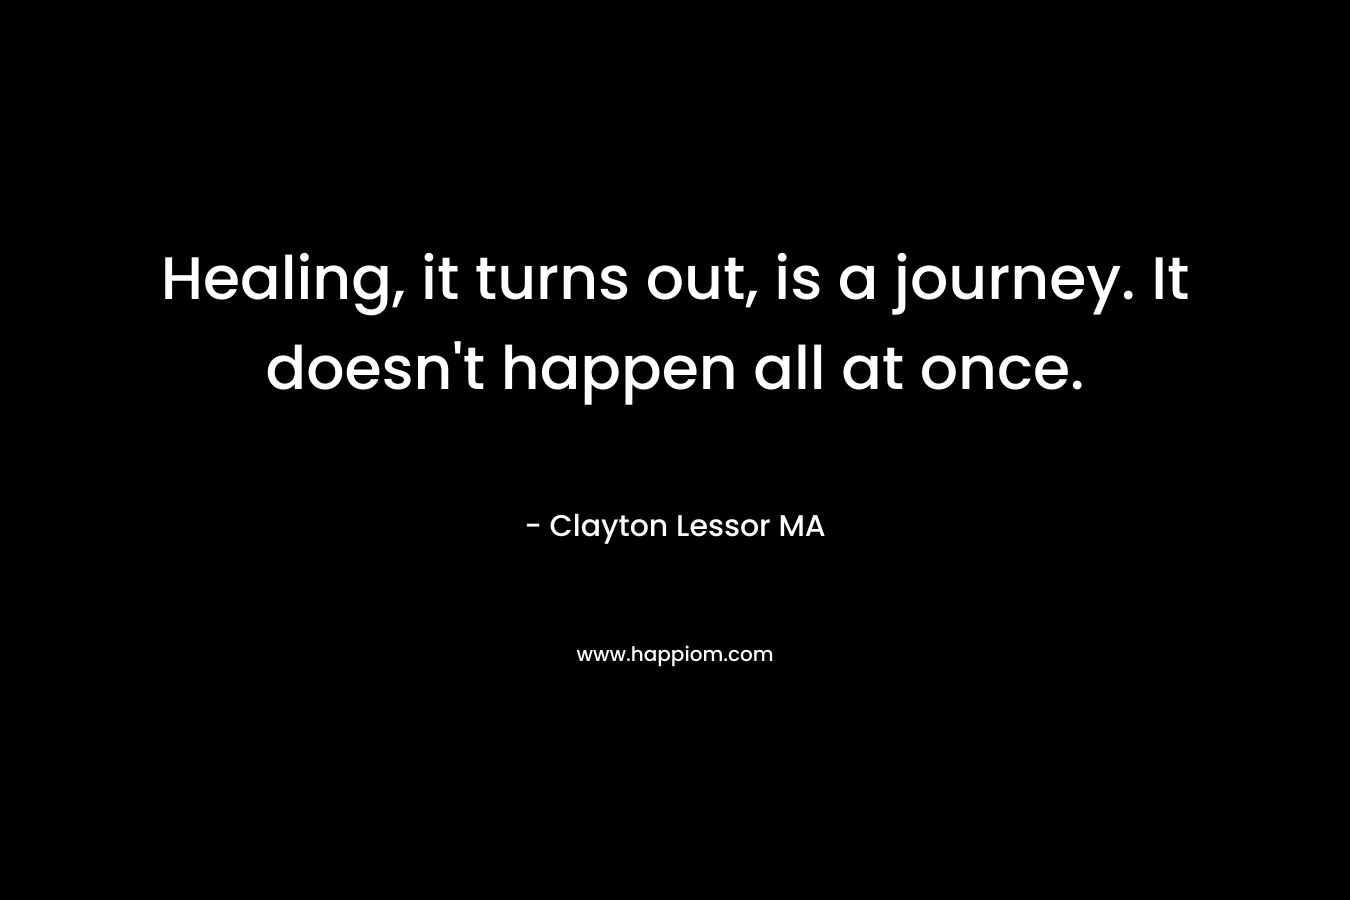 Healing, it turns out, is a journey. It doesn't happen all at once.